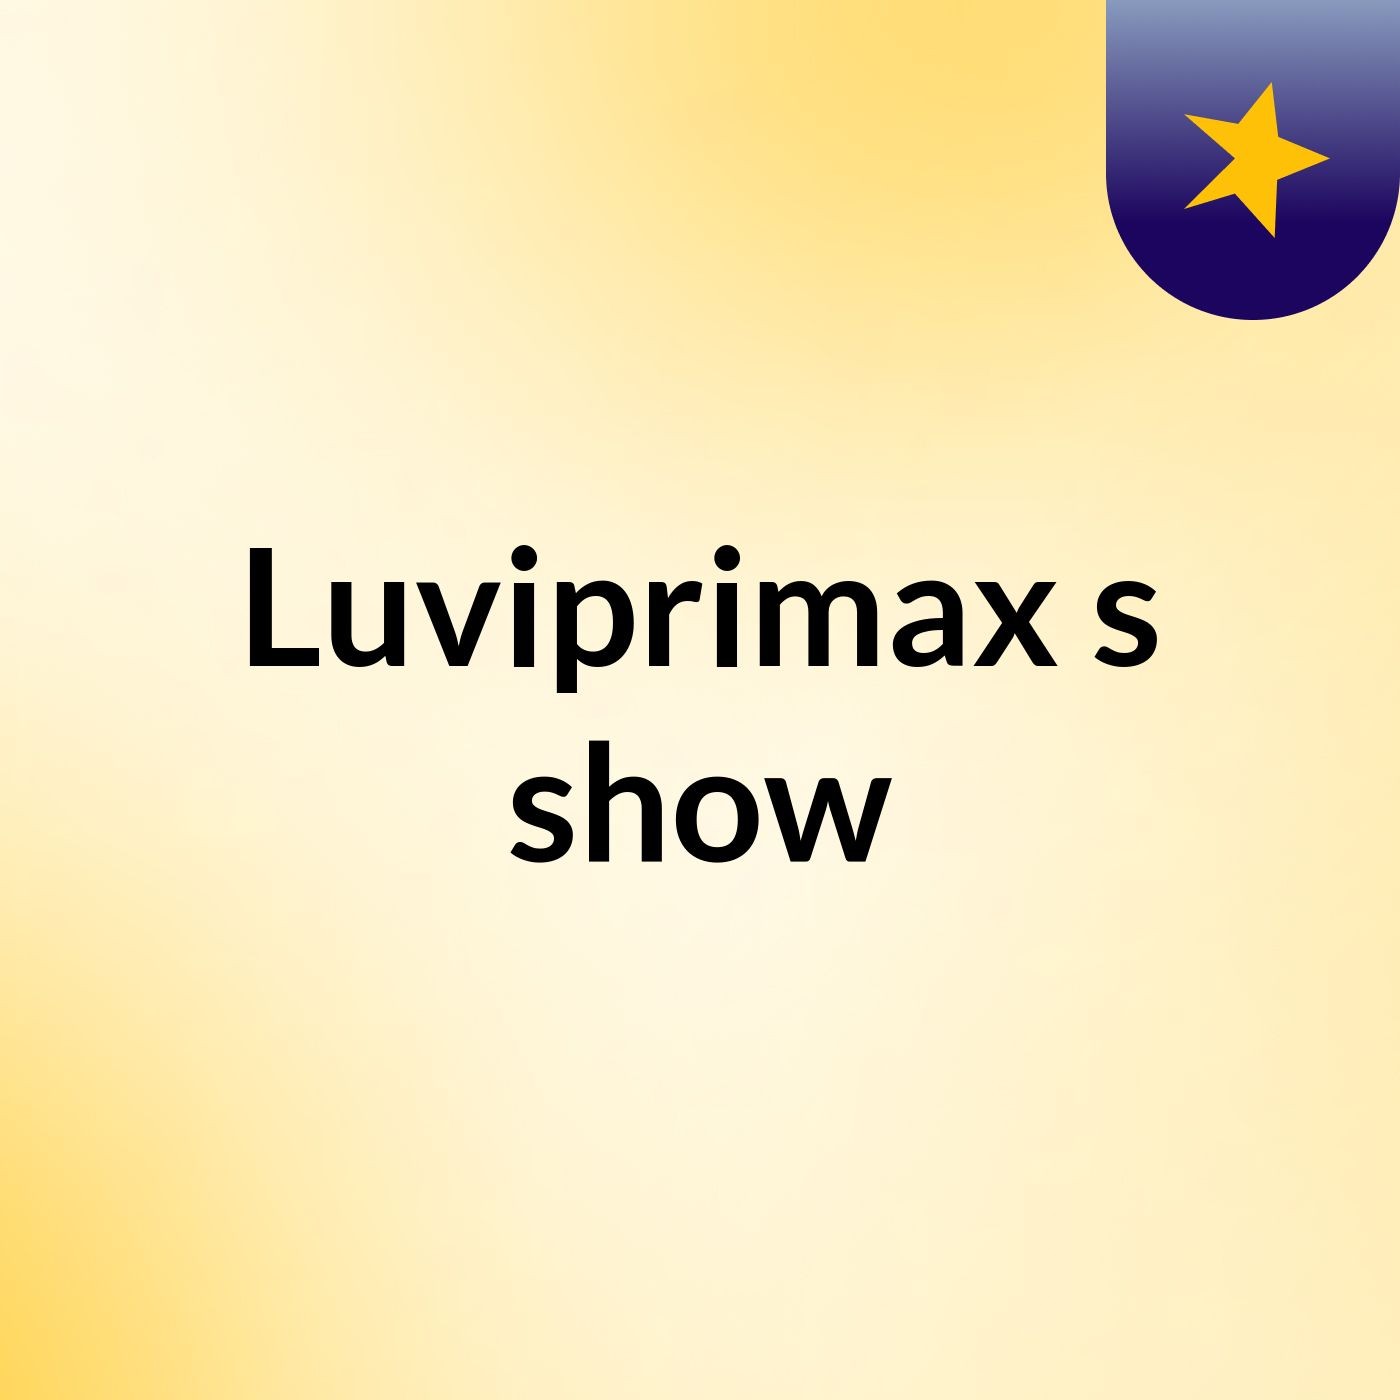 Luviprimax's show